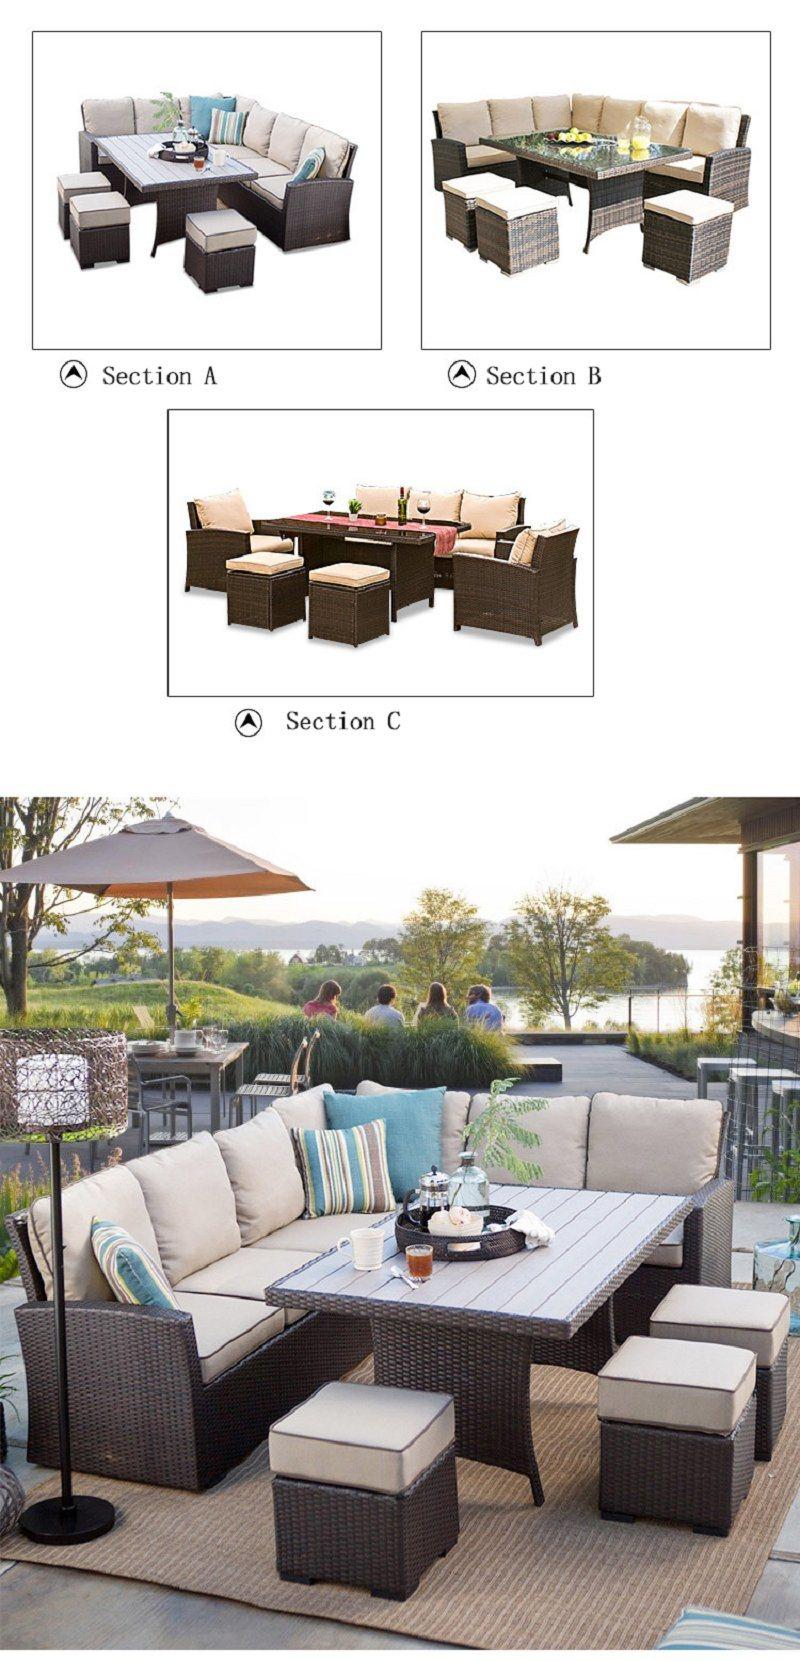 Patio Wicker Conversation Set All-Weather Rattan Outdoor Sectional Sofa Furniture